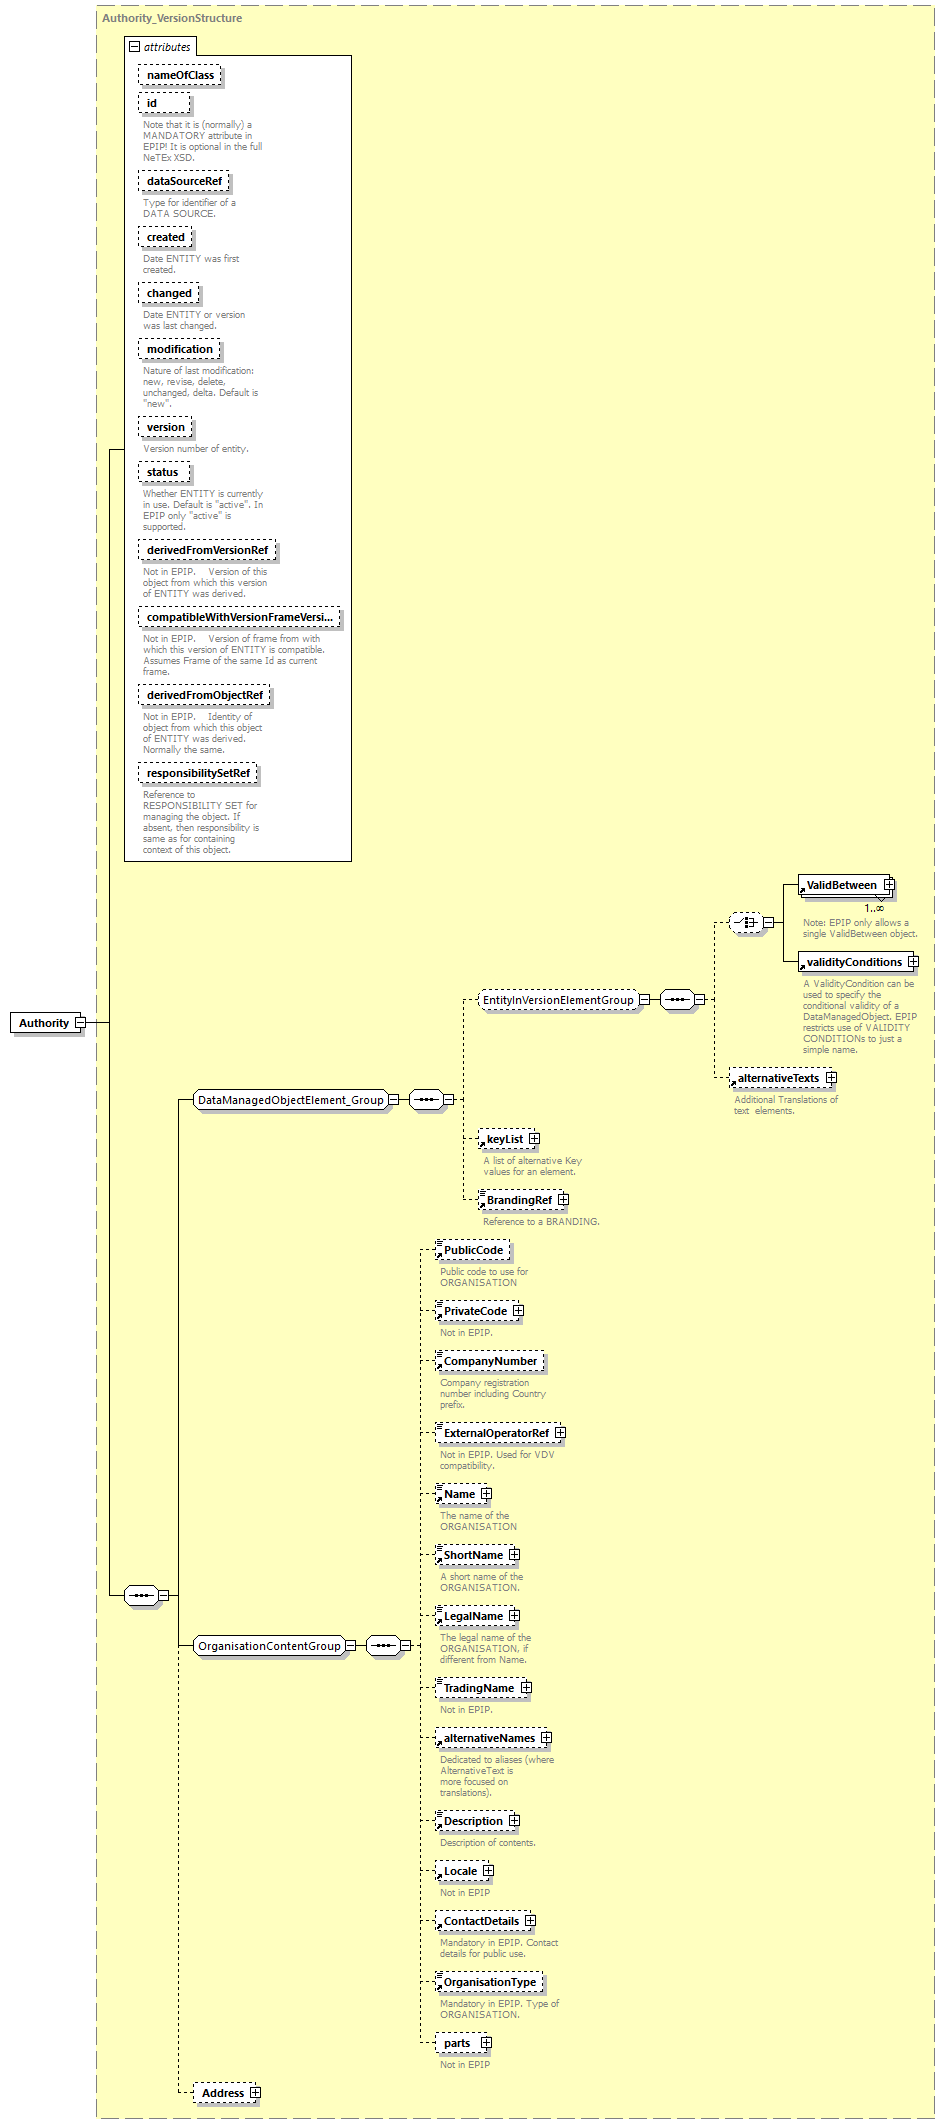 reduced_diagrams/reduced_p56.png